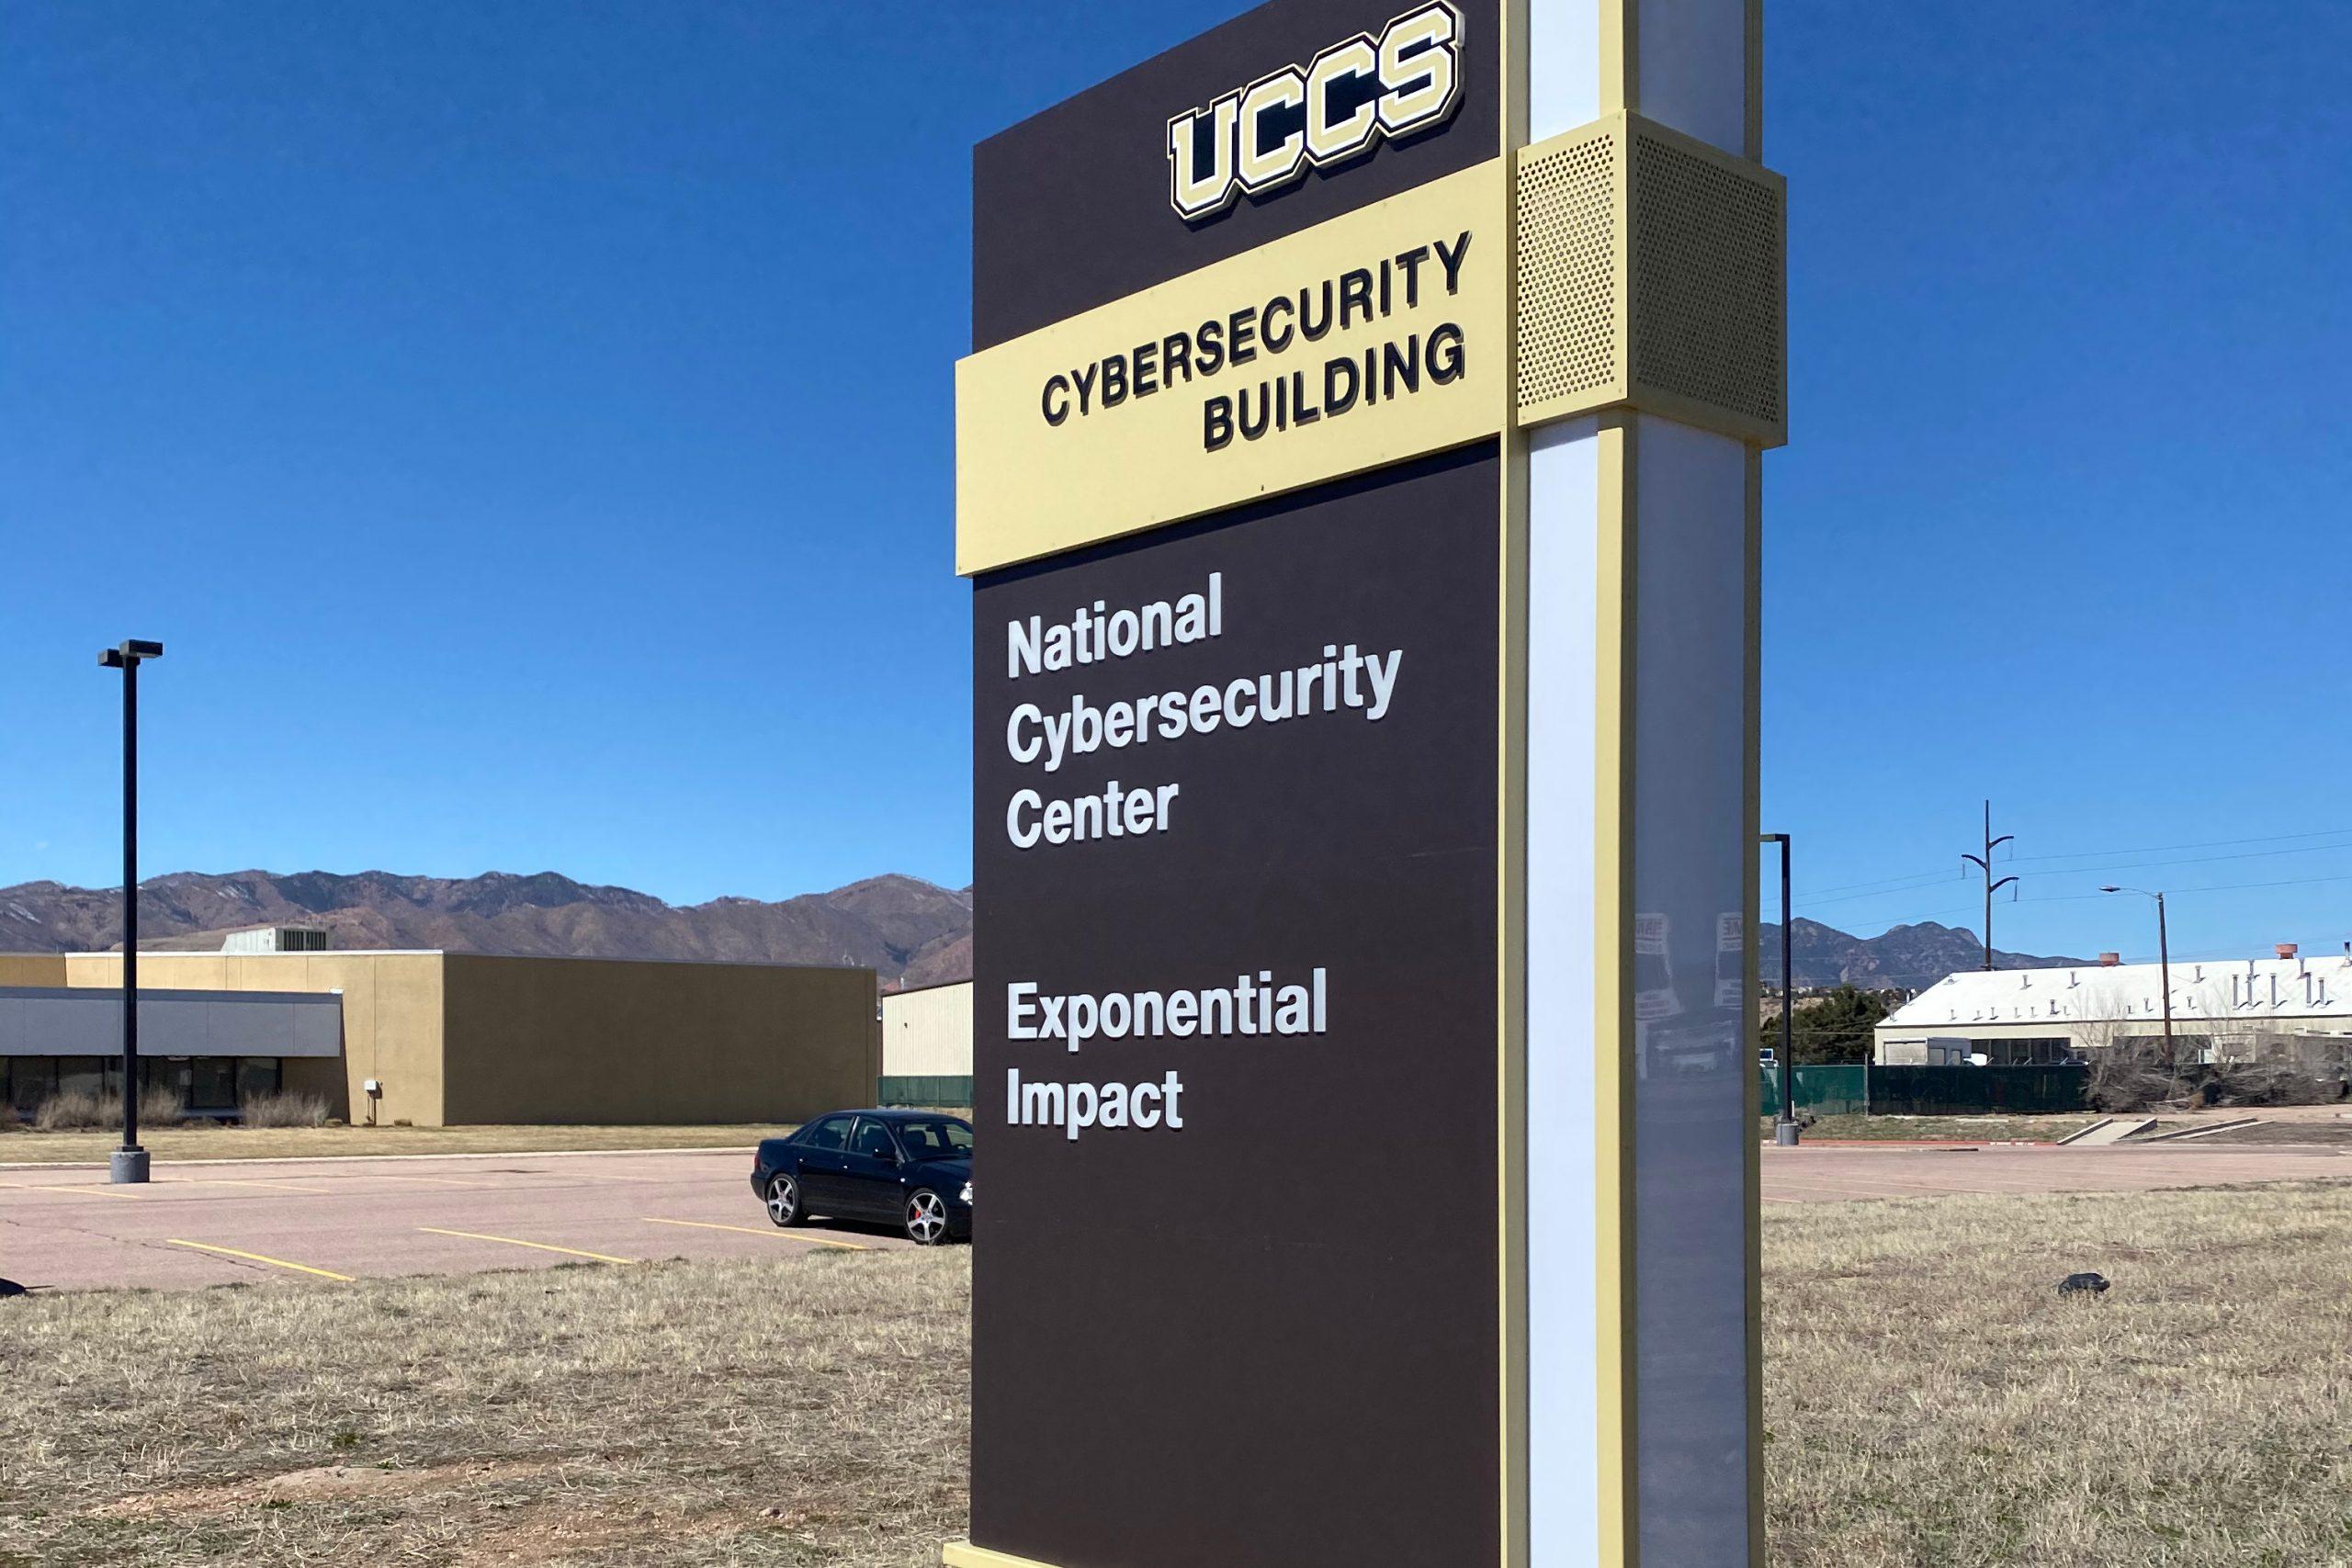 The exterior sign in front of the UCCS Cybersecurity Building.